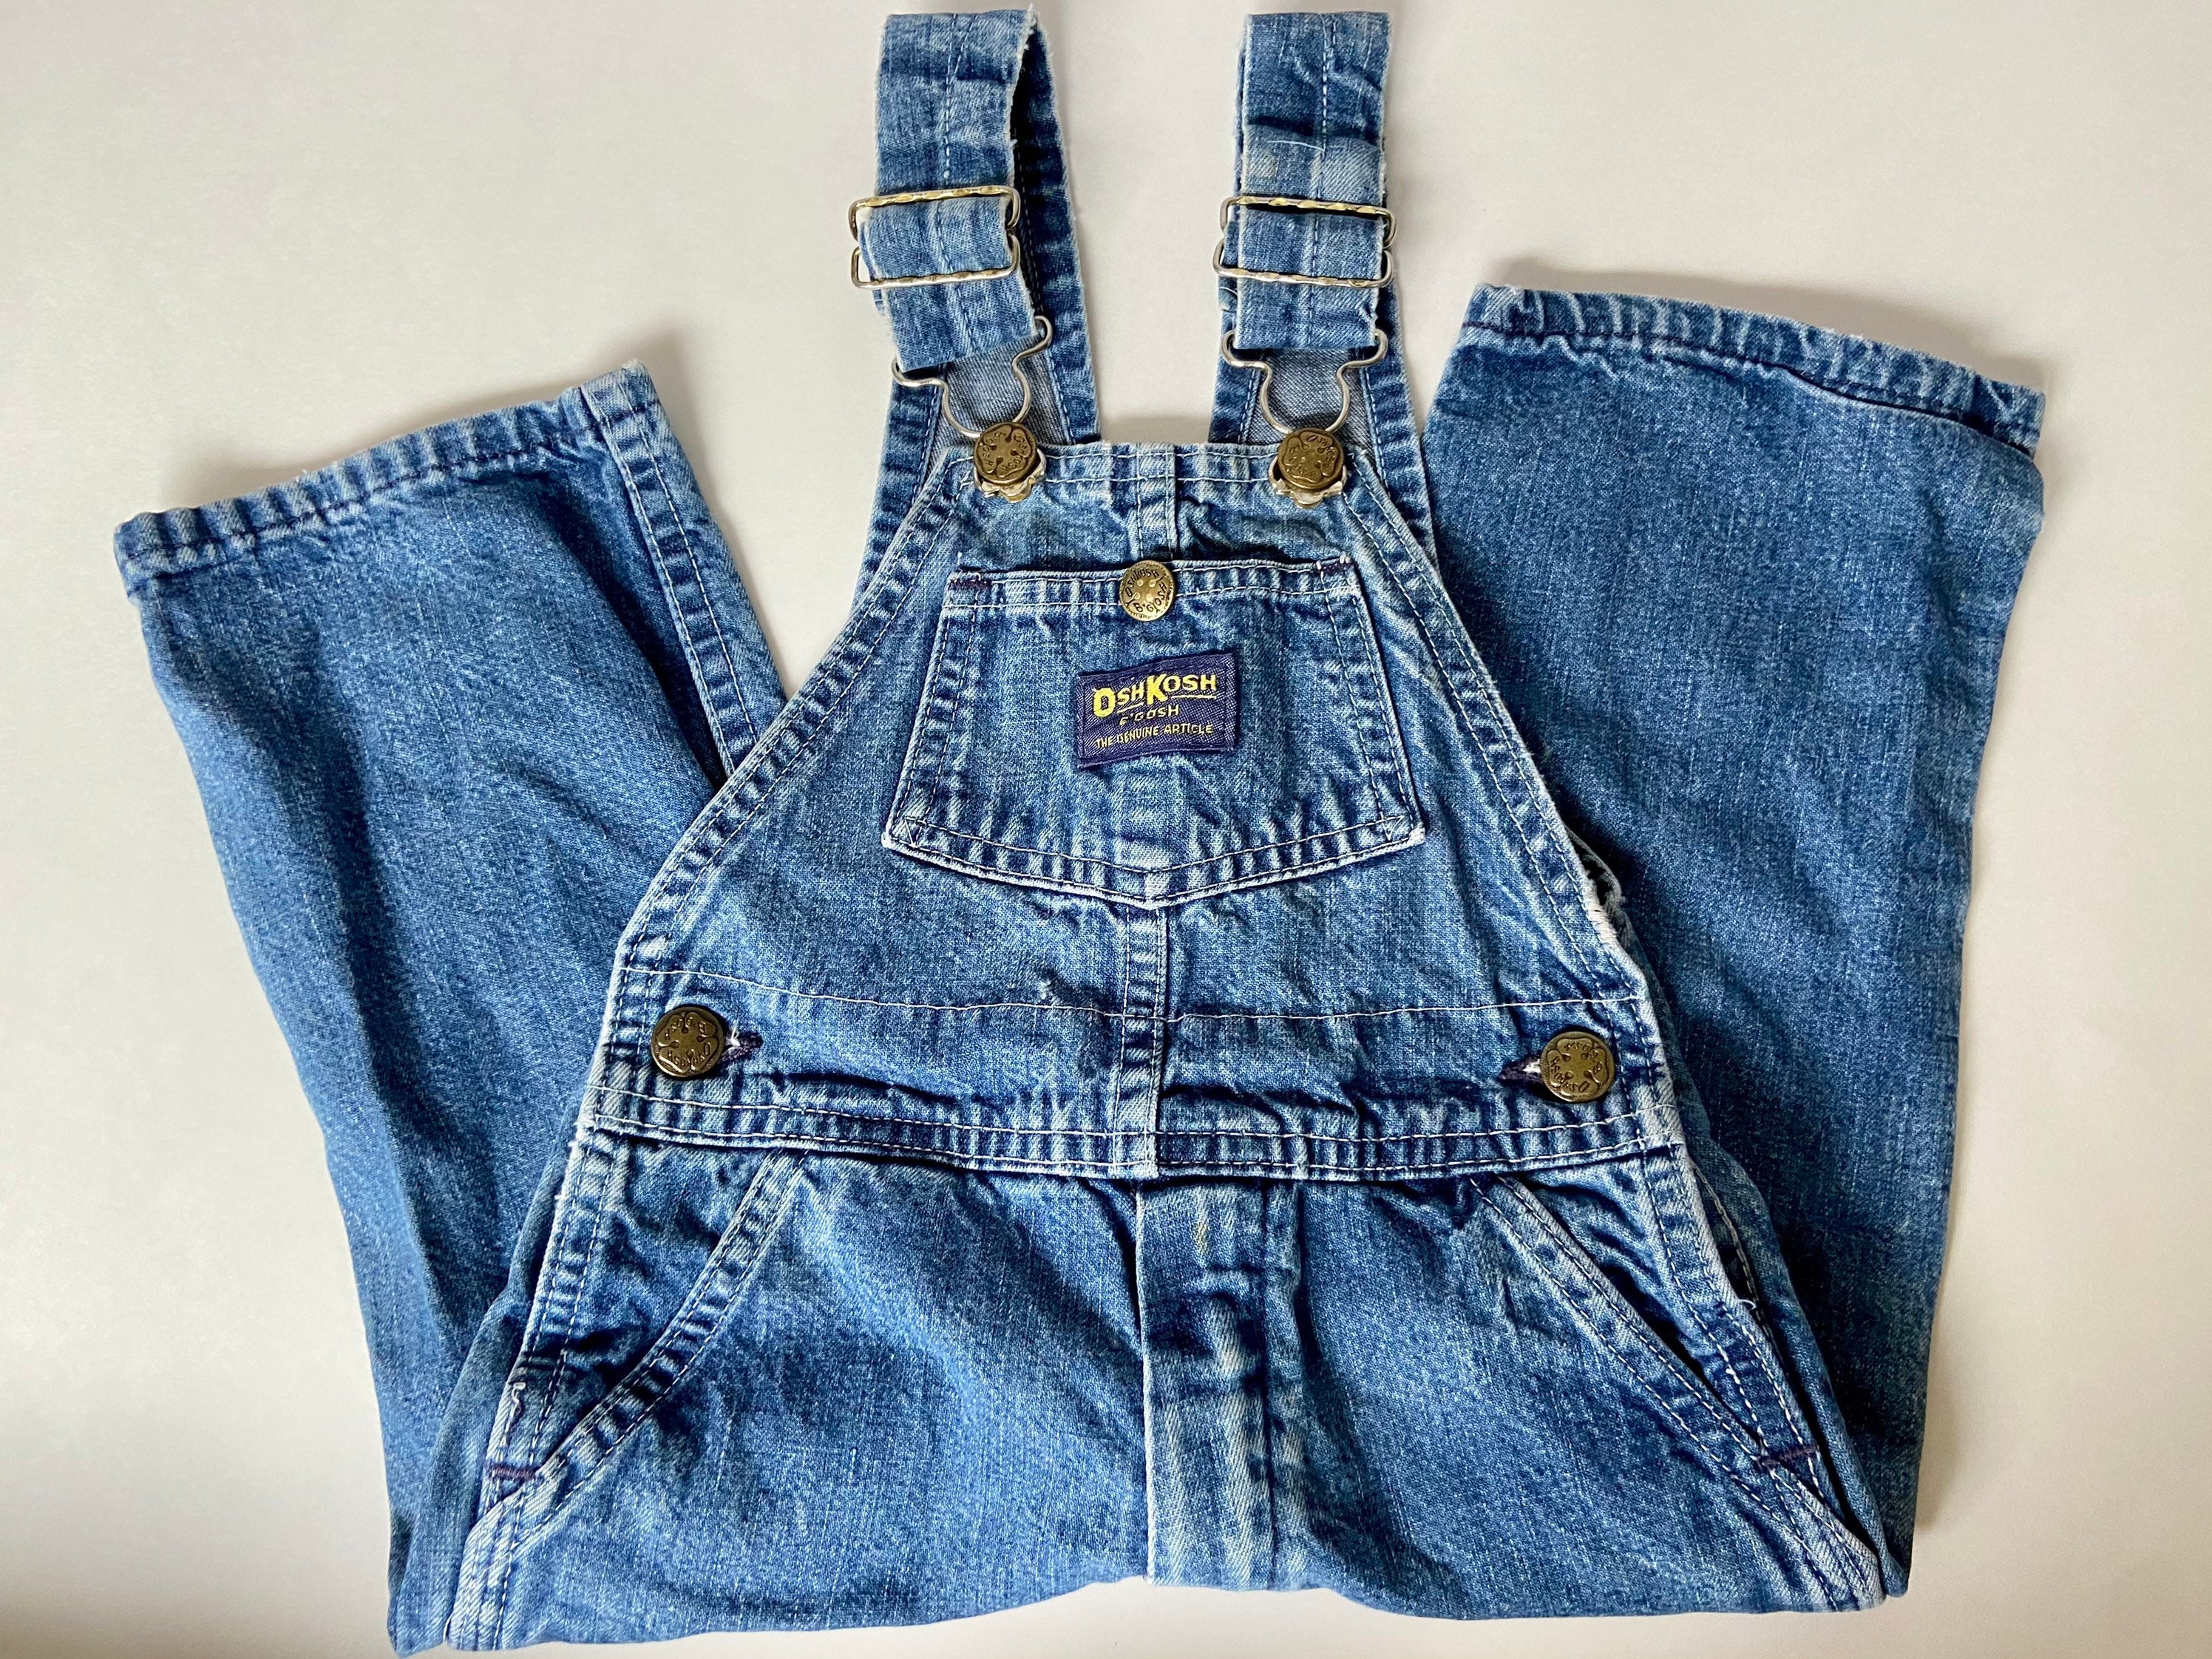 Farmer Overalls for sale | Only 2 left at -75%